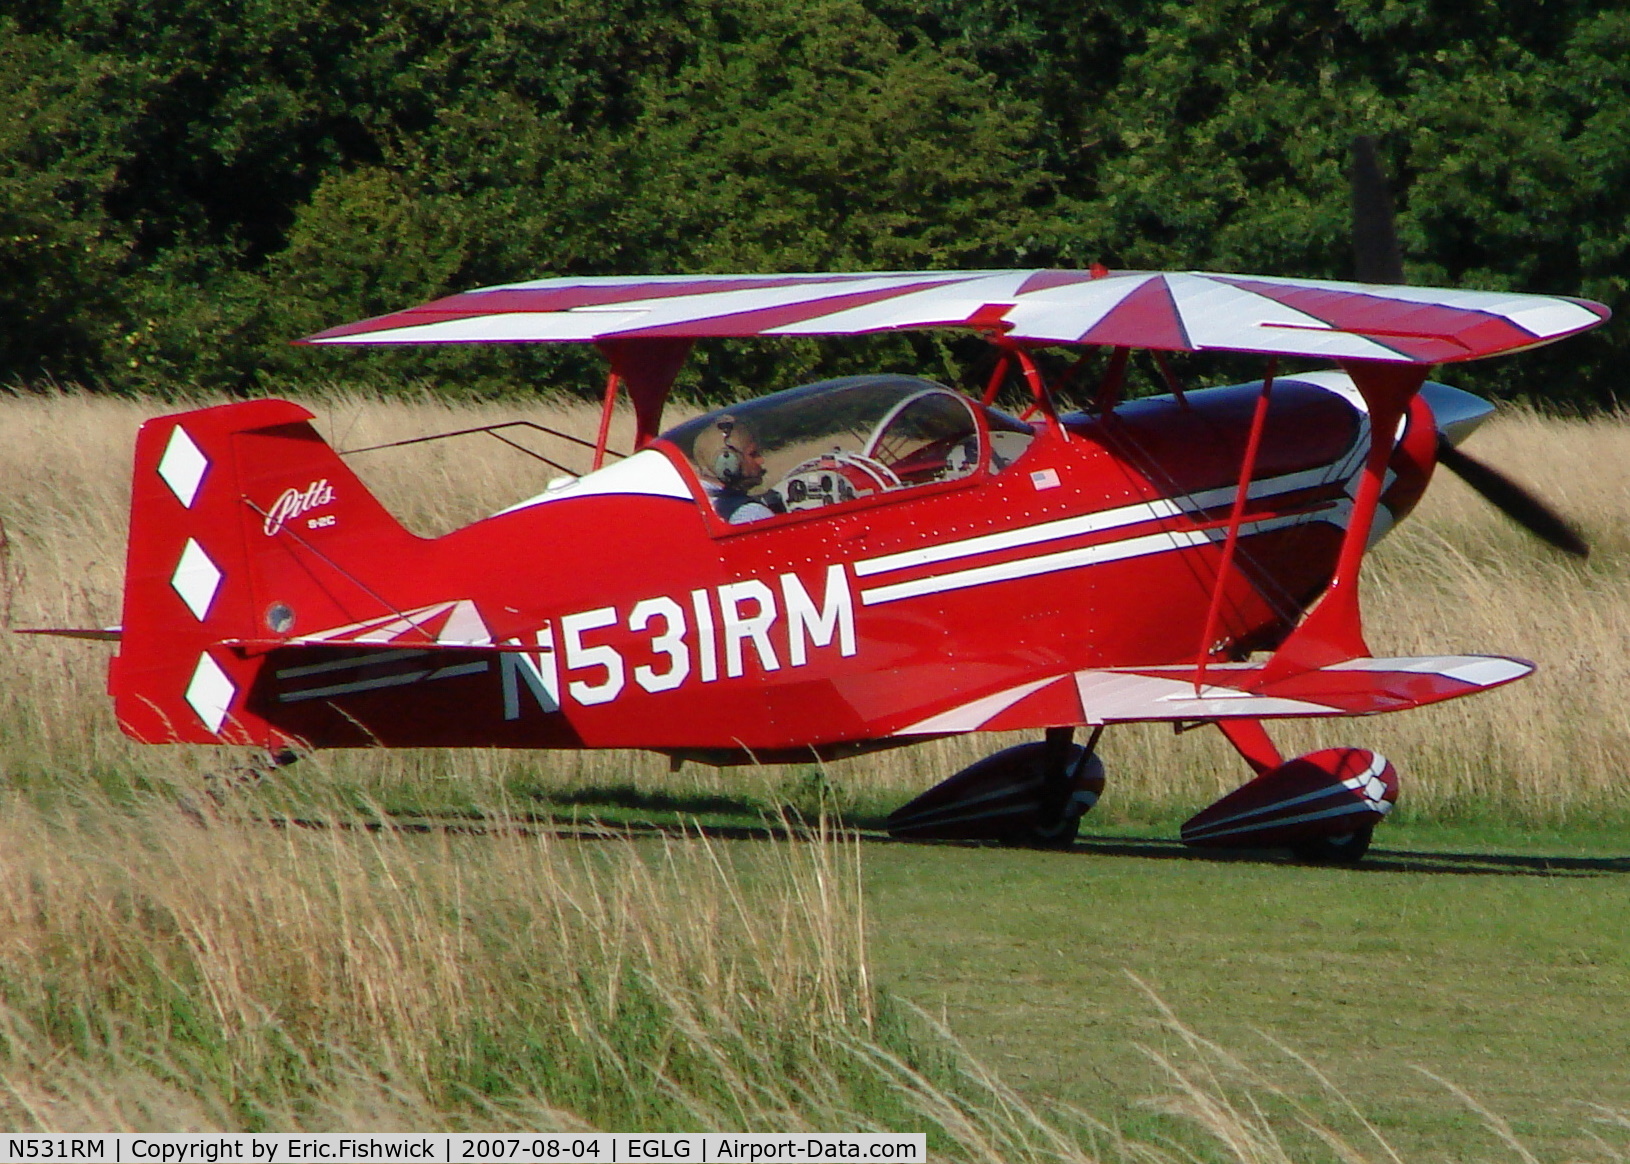 N531RM, 1999 Aviat Pitts S-2C Special C/N 6018, 2. N531RM at Panshanger (Used by Stuart Reeves in BAA Aerobatic Competitions)